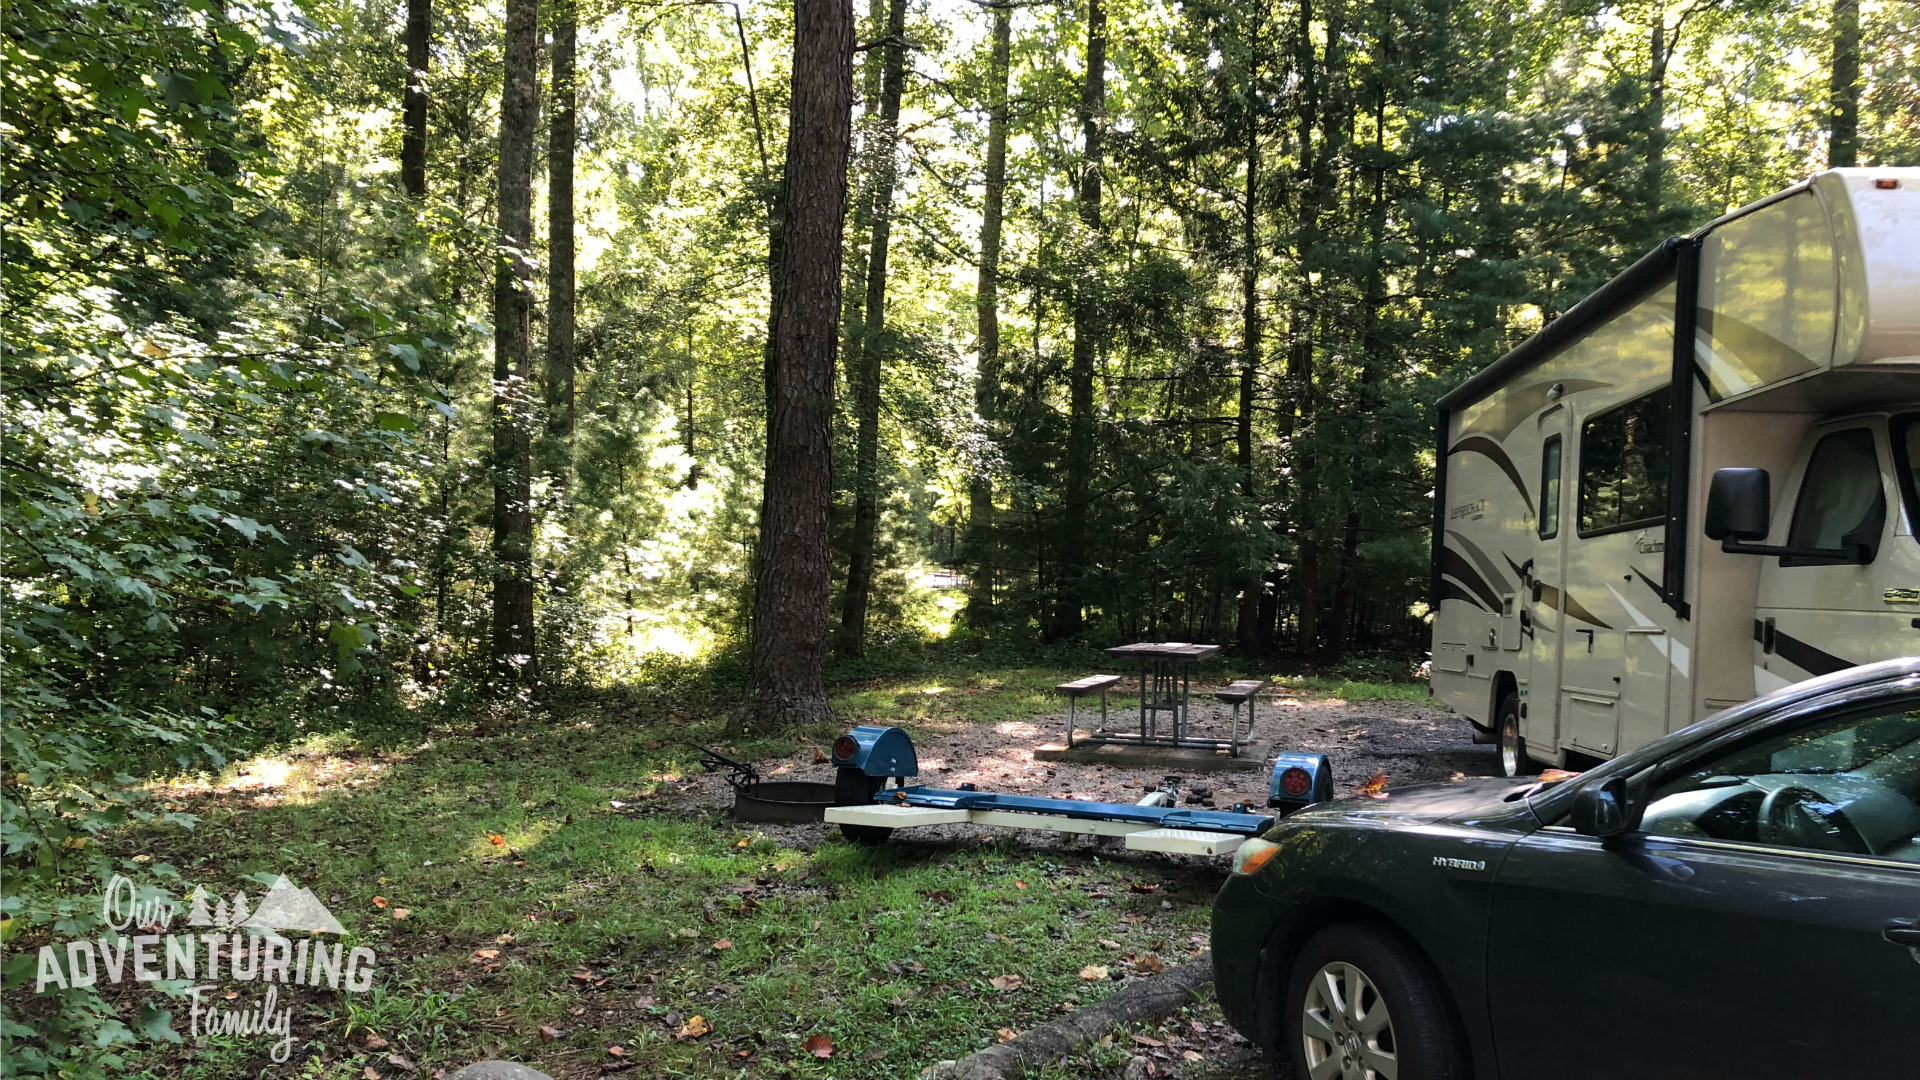 We haven’t visited them all, but here’s our favorite Great Smoky Mountains campgrounds in and near the park. Find them at ouradventuringfamily.com.